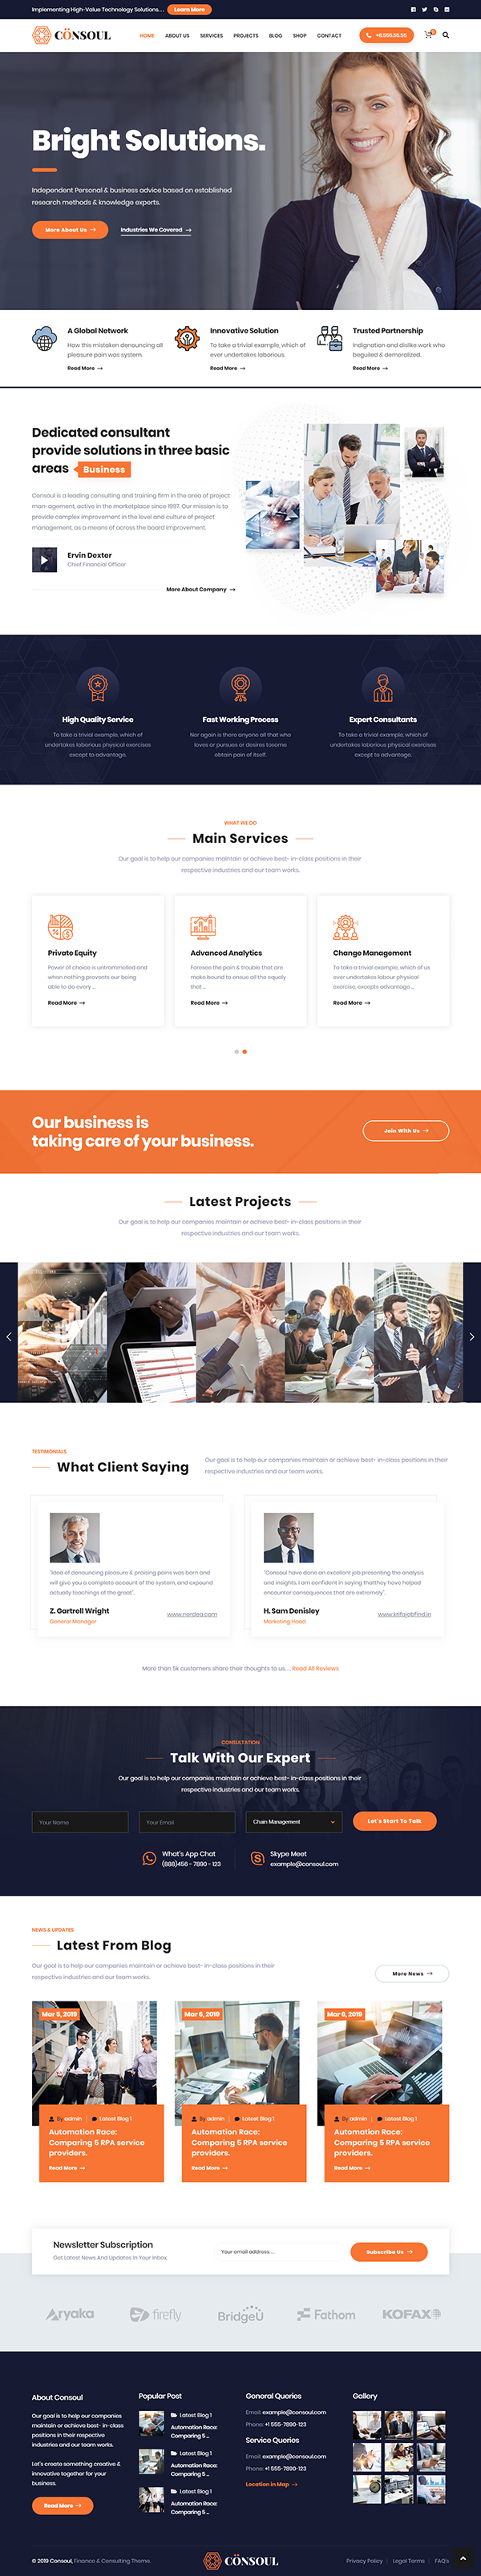 Consoul - Consulting Business WordPress Theme